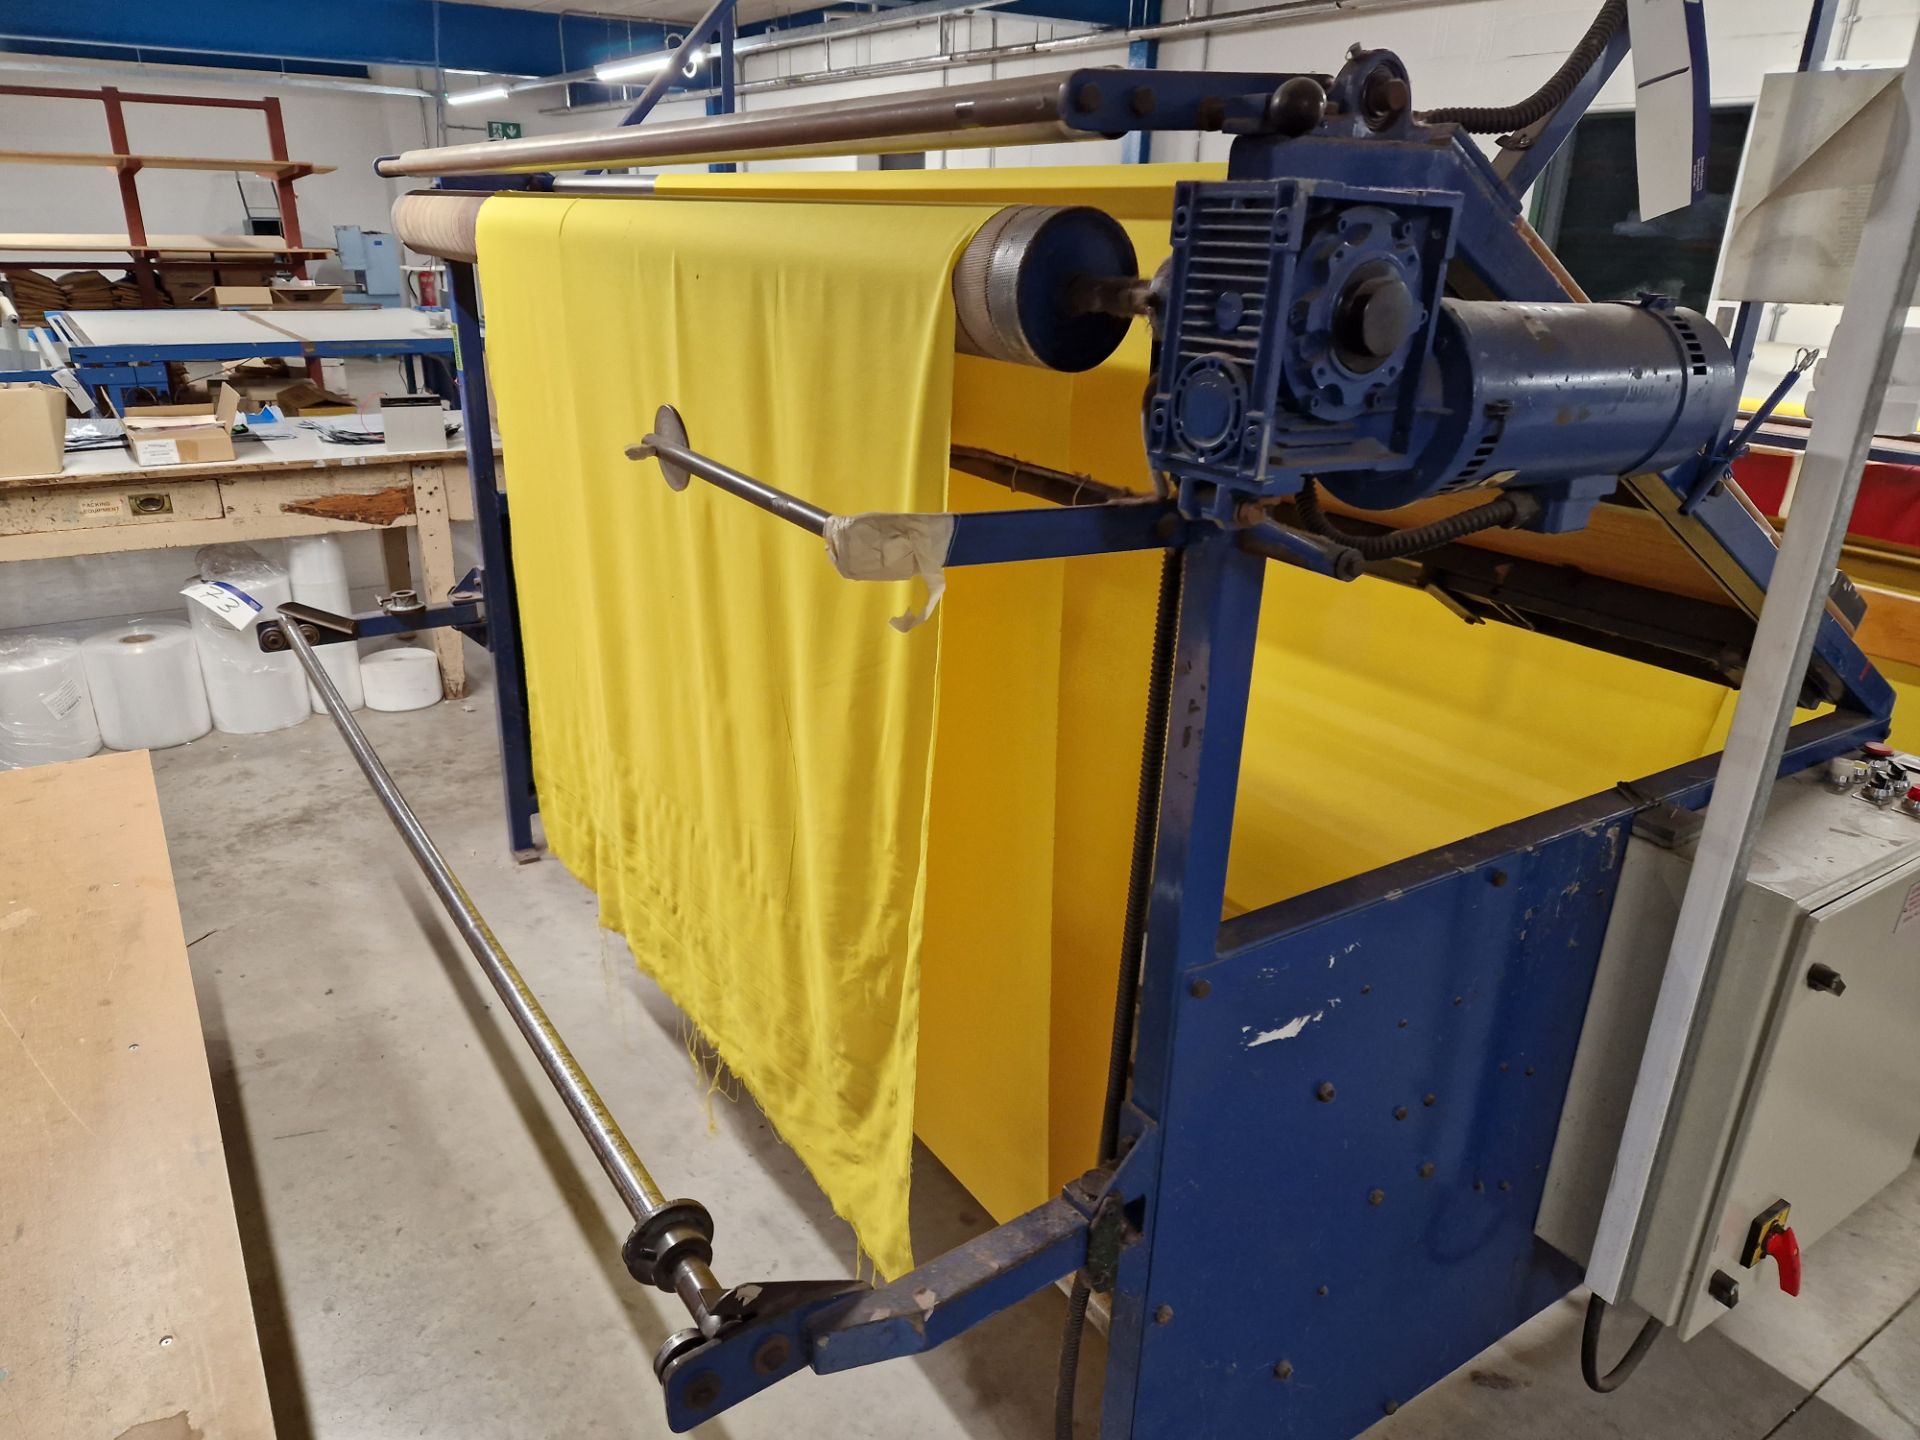 Gordon Warin Fabric Inspection & Measuring Machine, Working Width Approx. 2.45m, Serial no. 4367, - Image 11 of 12